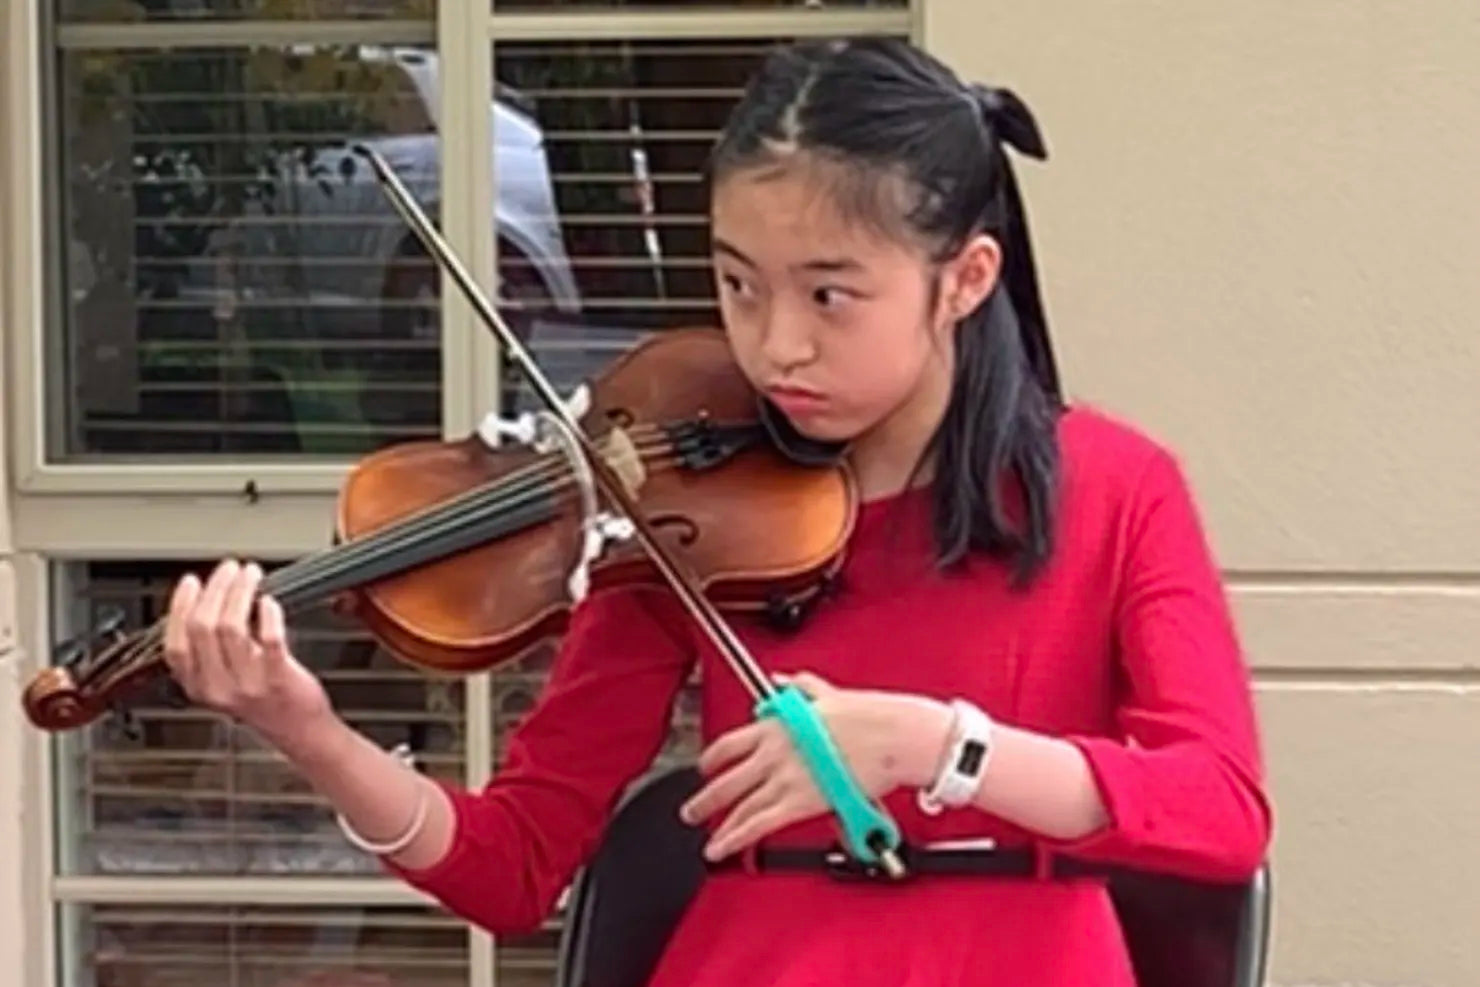 Tiana Relearns to Play Violin After a Stroke at Age 10